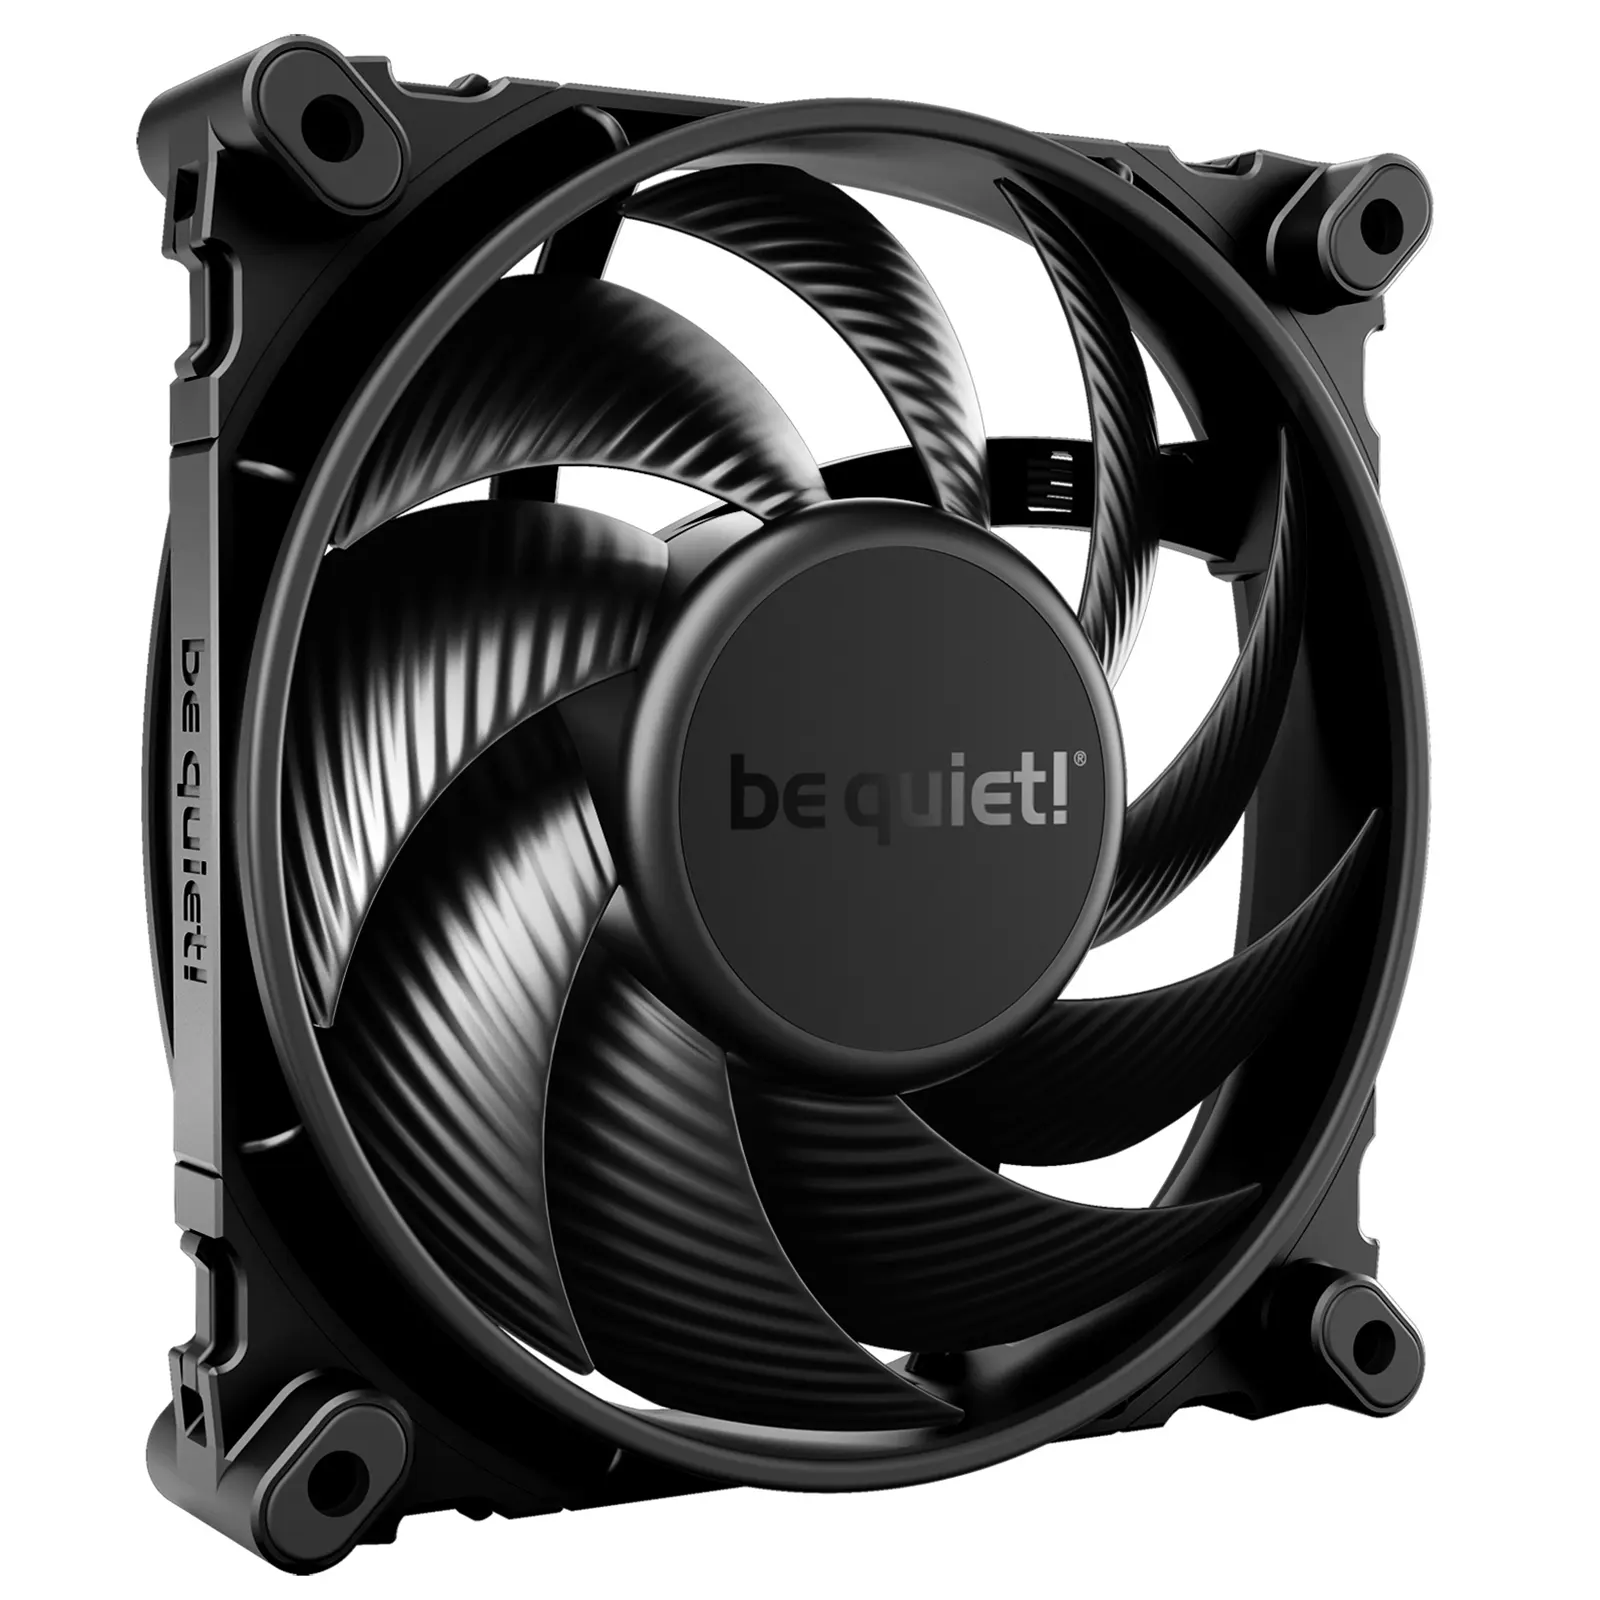 be quiet! Silent Wings 4 PWM Black Fan, 120mm, 1600RPM, 4-Pin PWM Fan Connector, Black Frame, Black Blades, Optimized Fan Blades for High End Performance, 2 Mounting Options